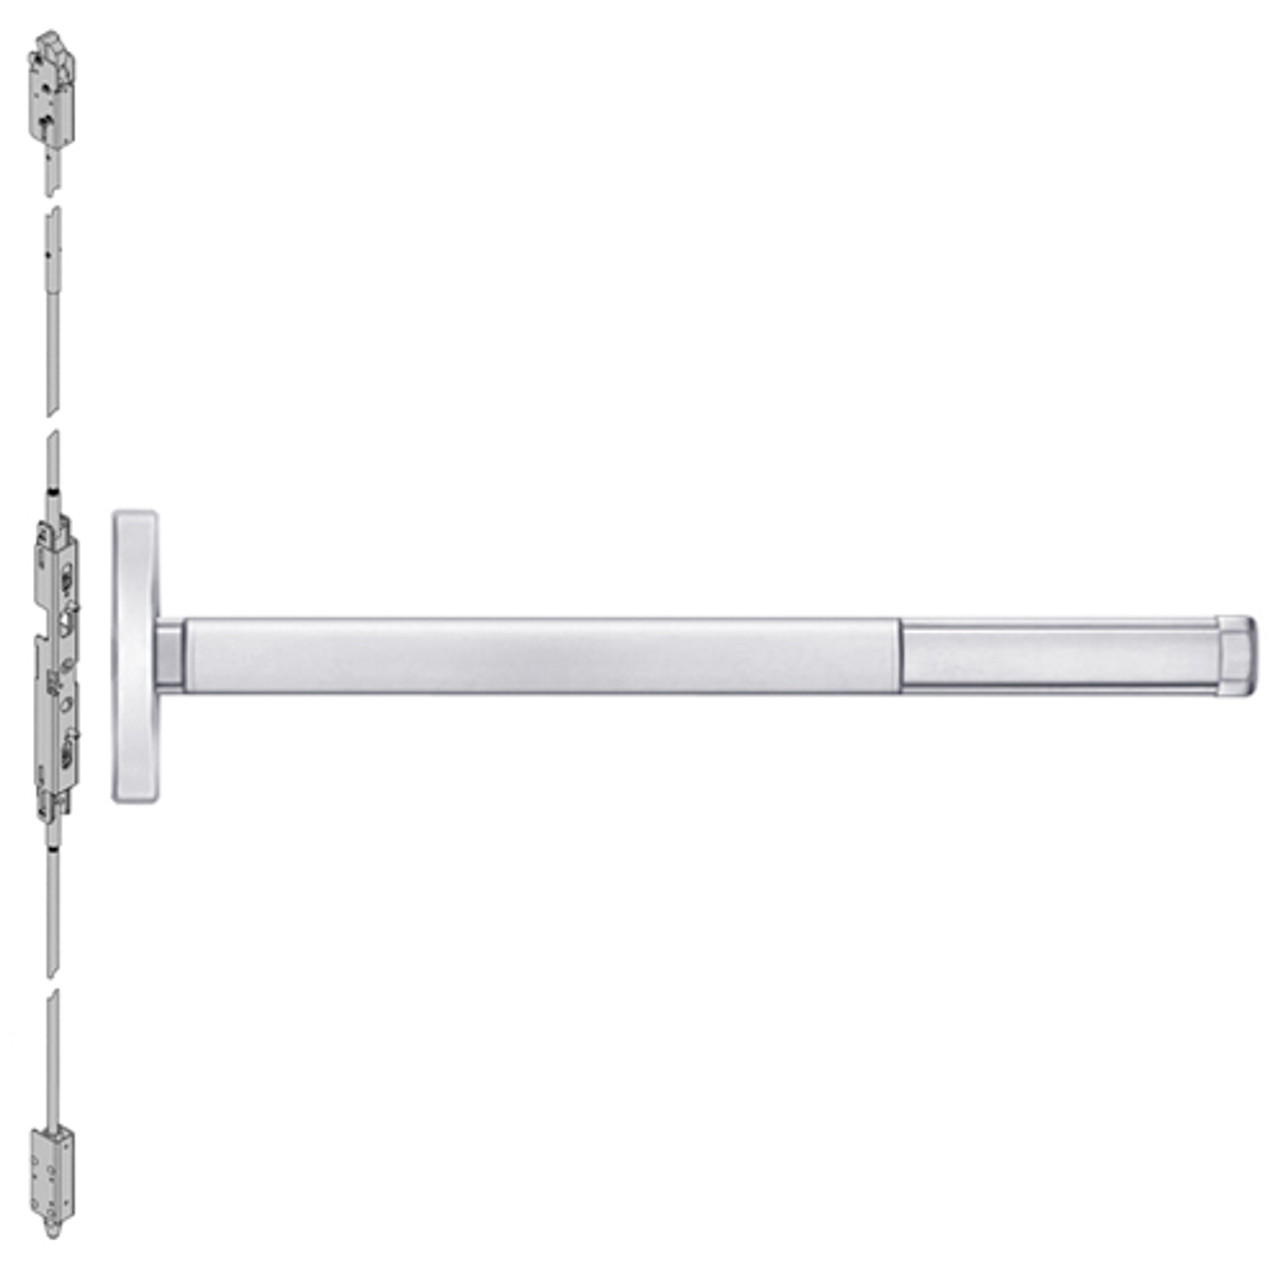 DE2602-625-48 PHI 2600 Series Concealed Vertical Rod Exit Device with Delayed Egress Prepped for Dummy Trim in Bright Chrome Finish